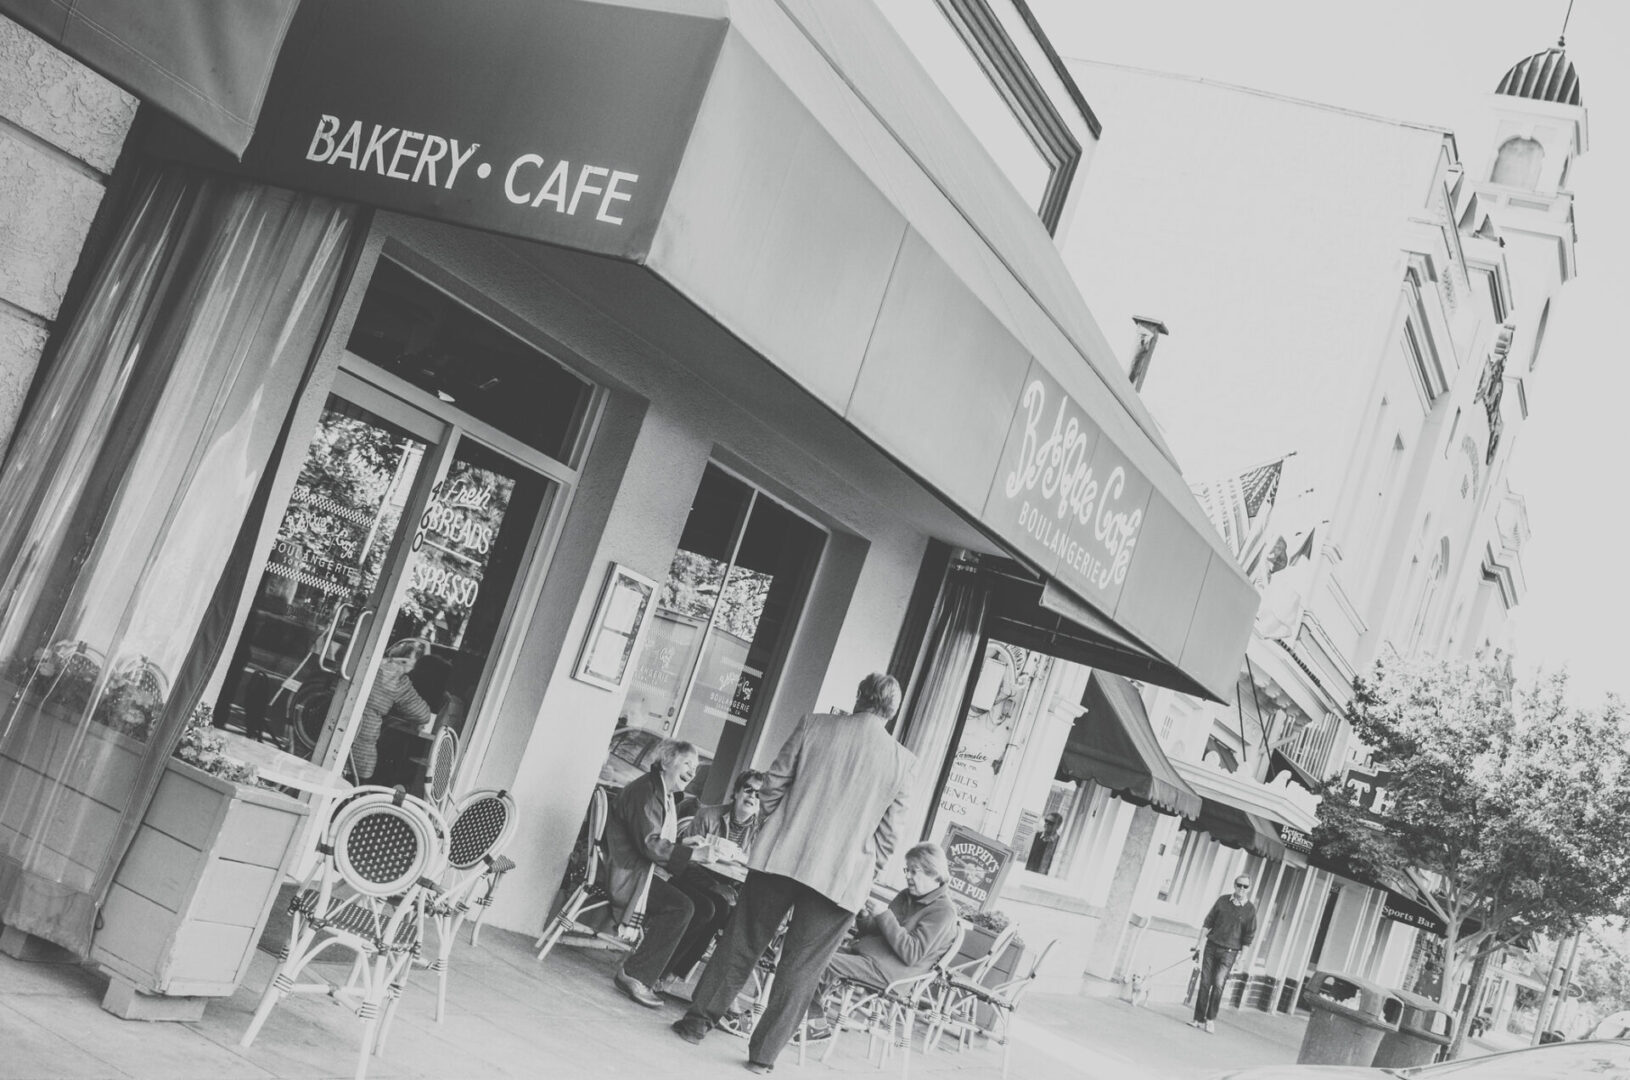 A black and white photo of people outside a bakery cafe.